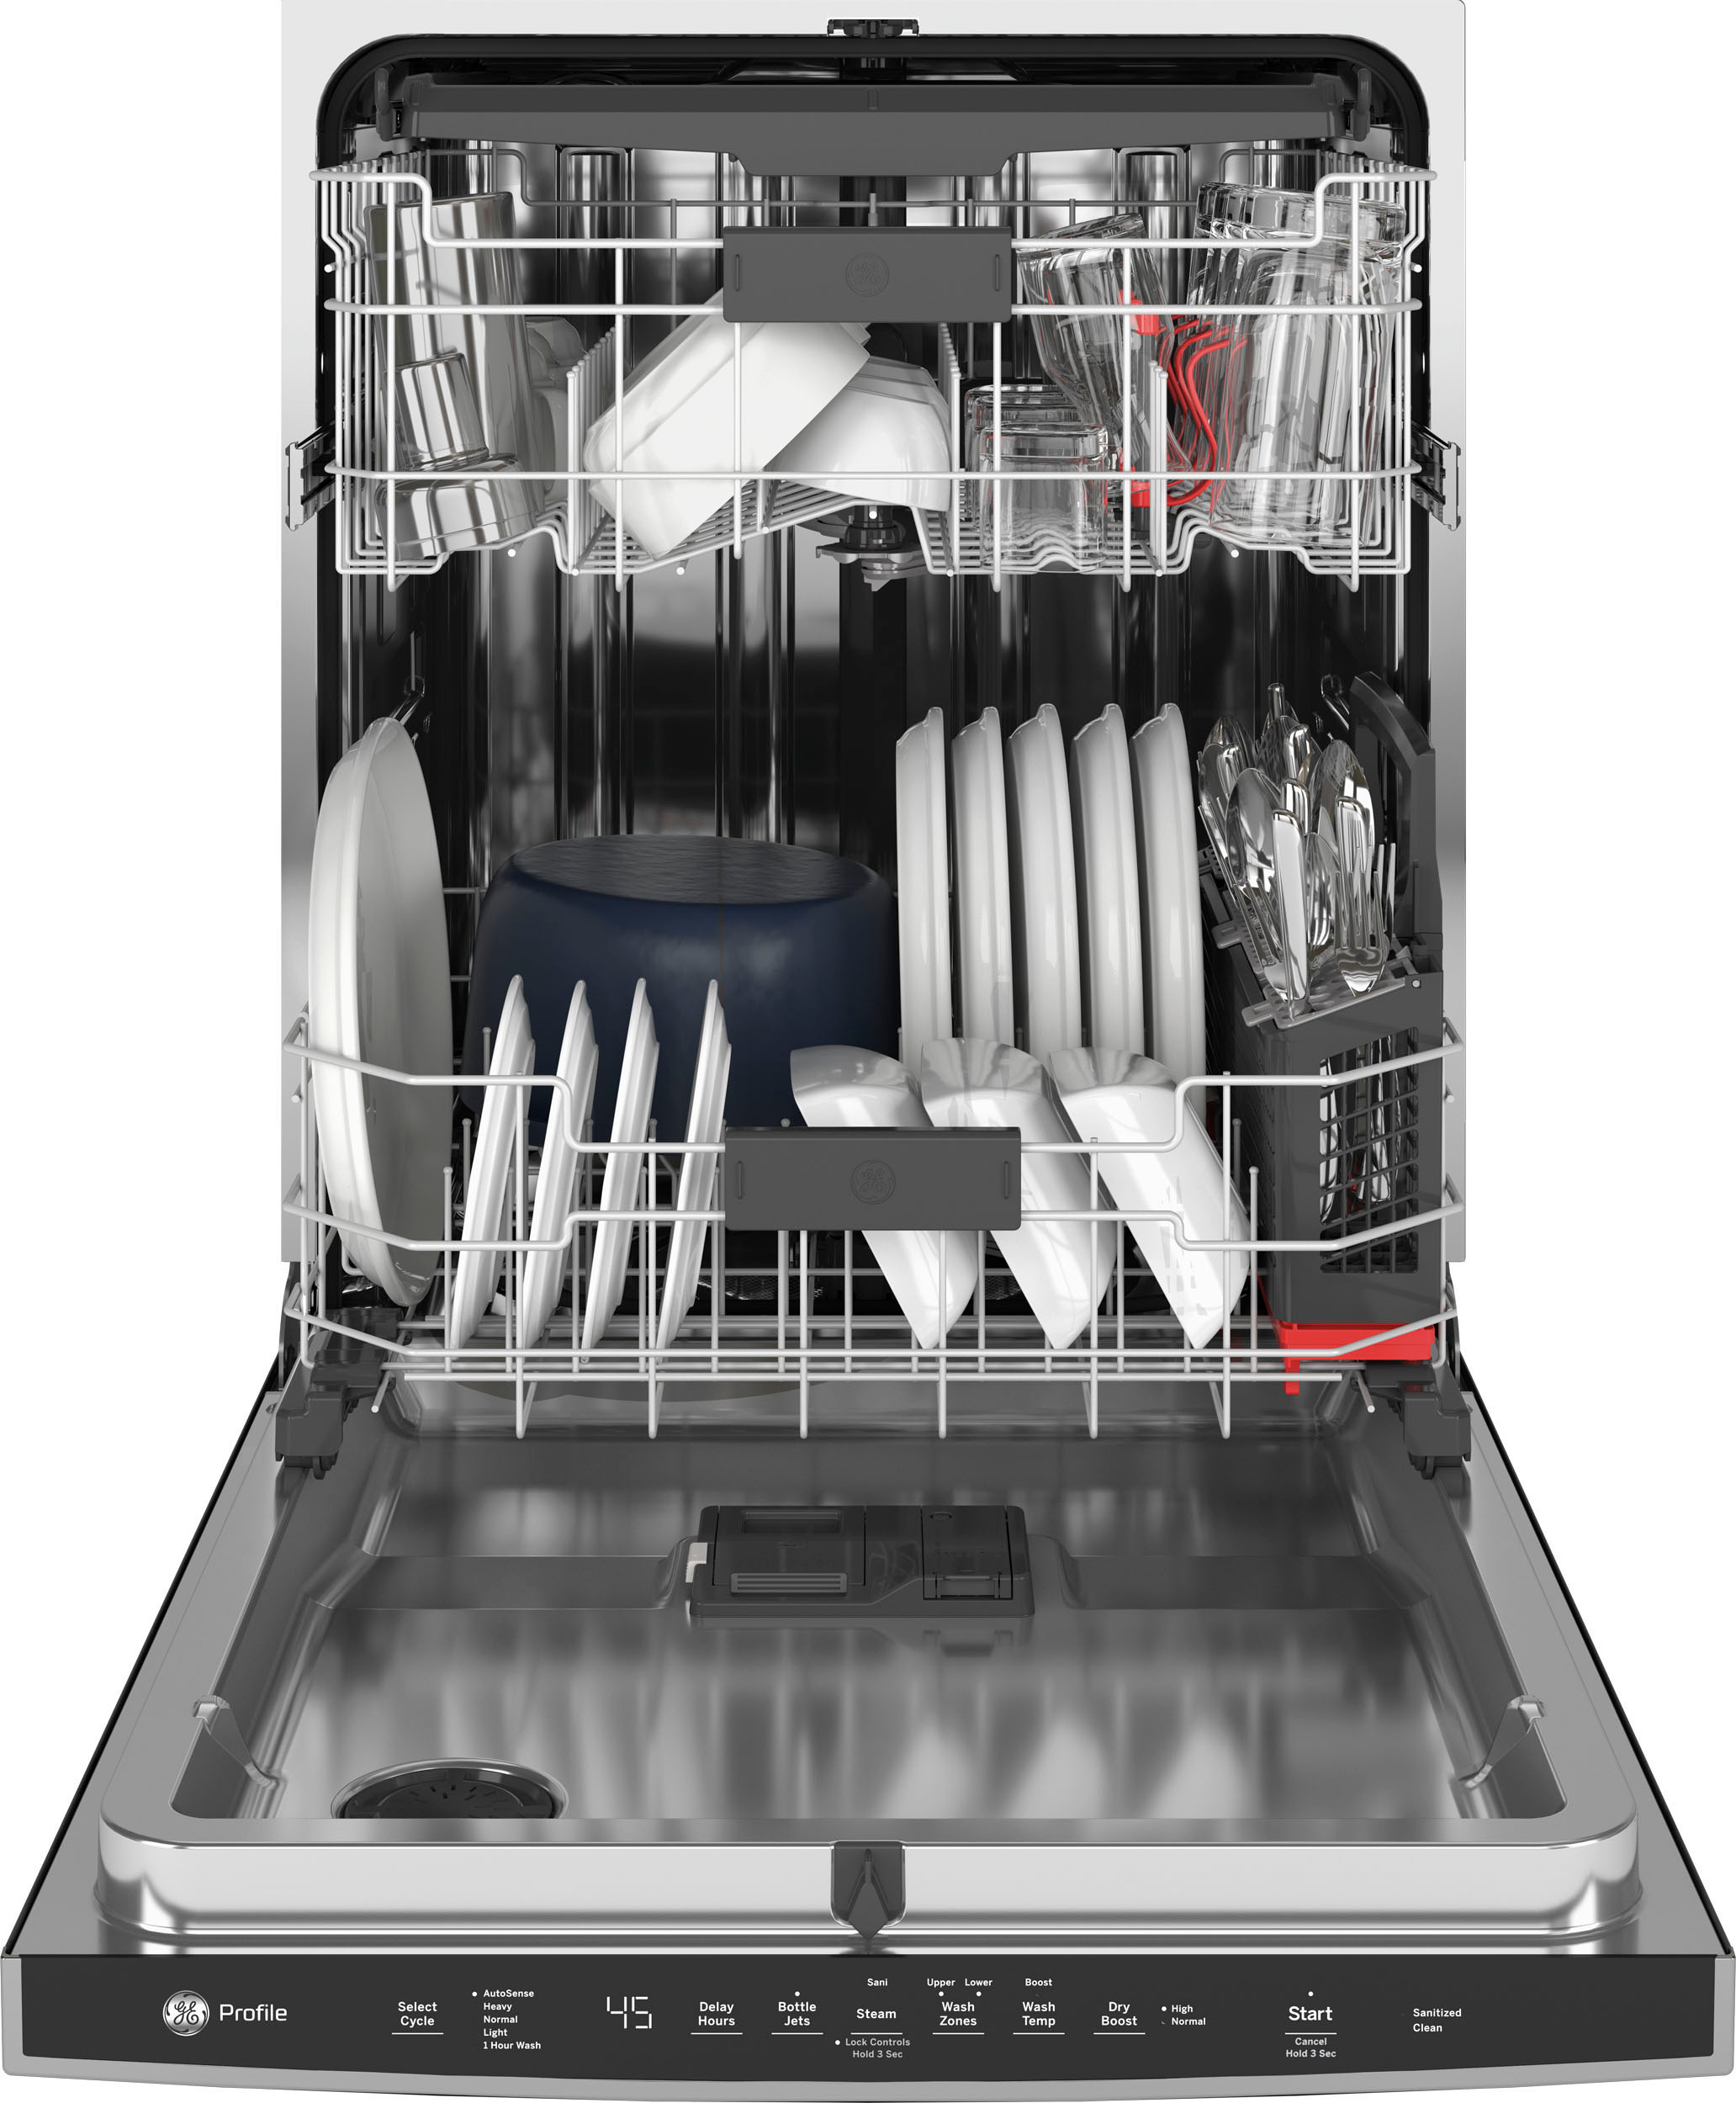 Cafe Stainless Interior Built-in Dishwasher with Hidden Controls